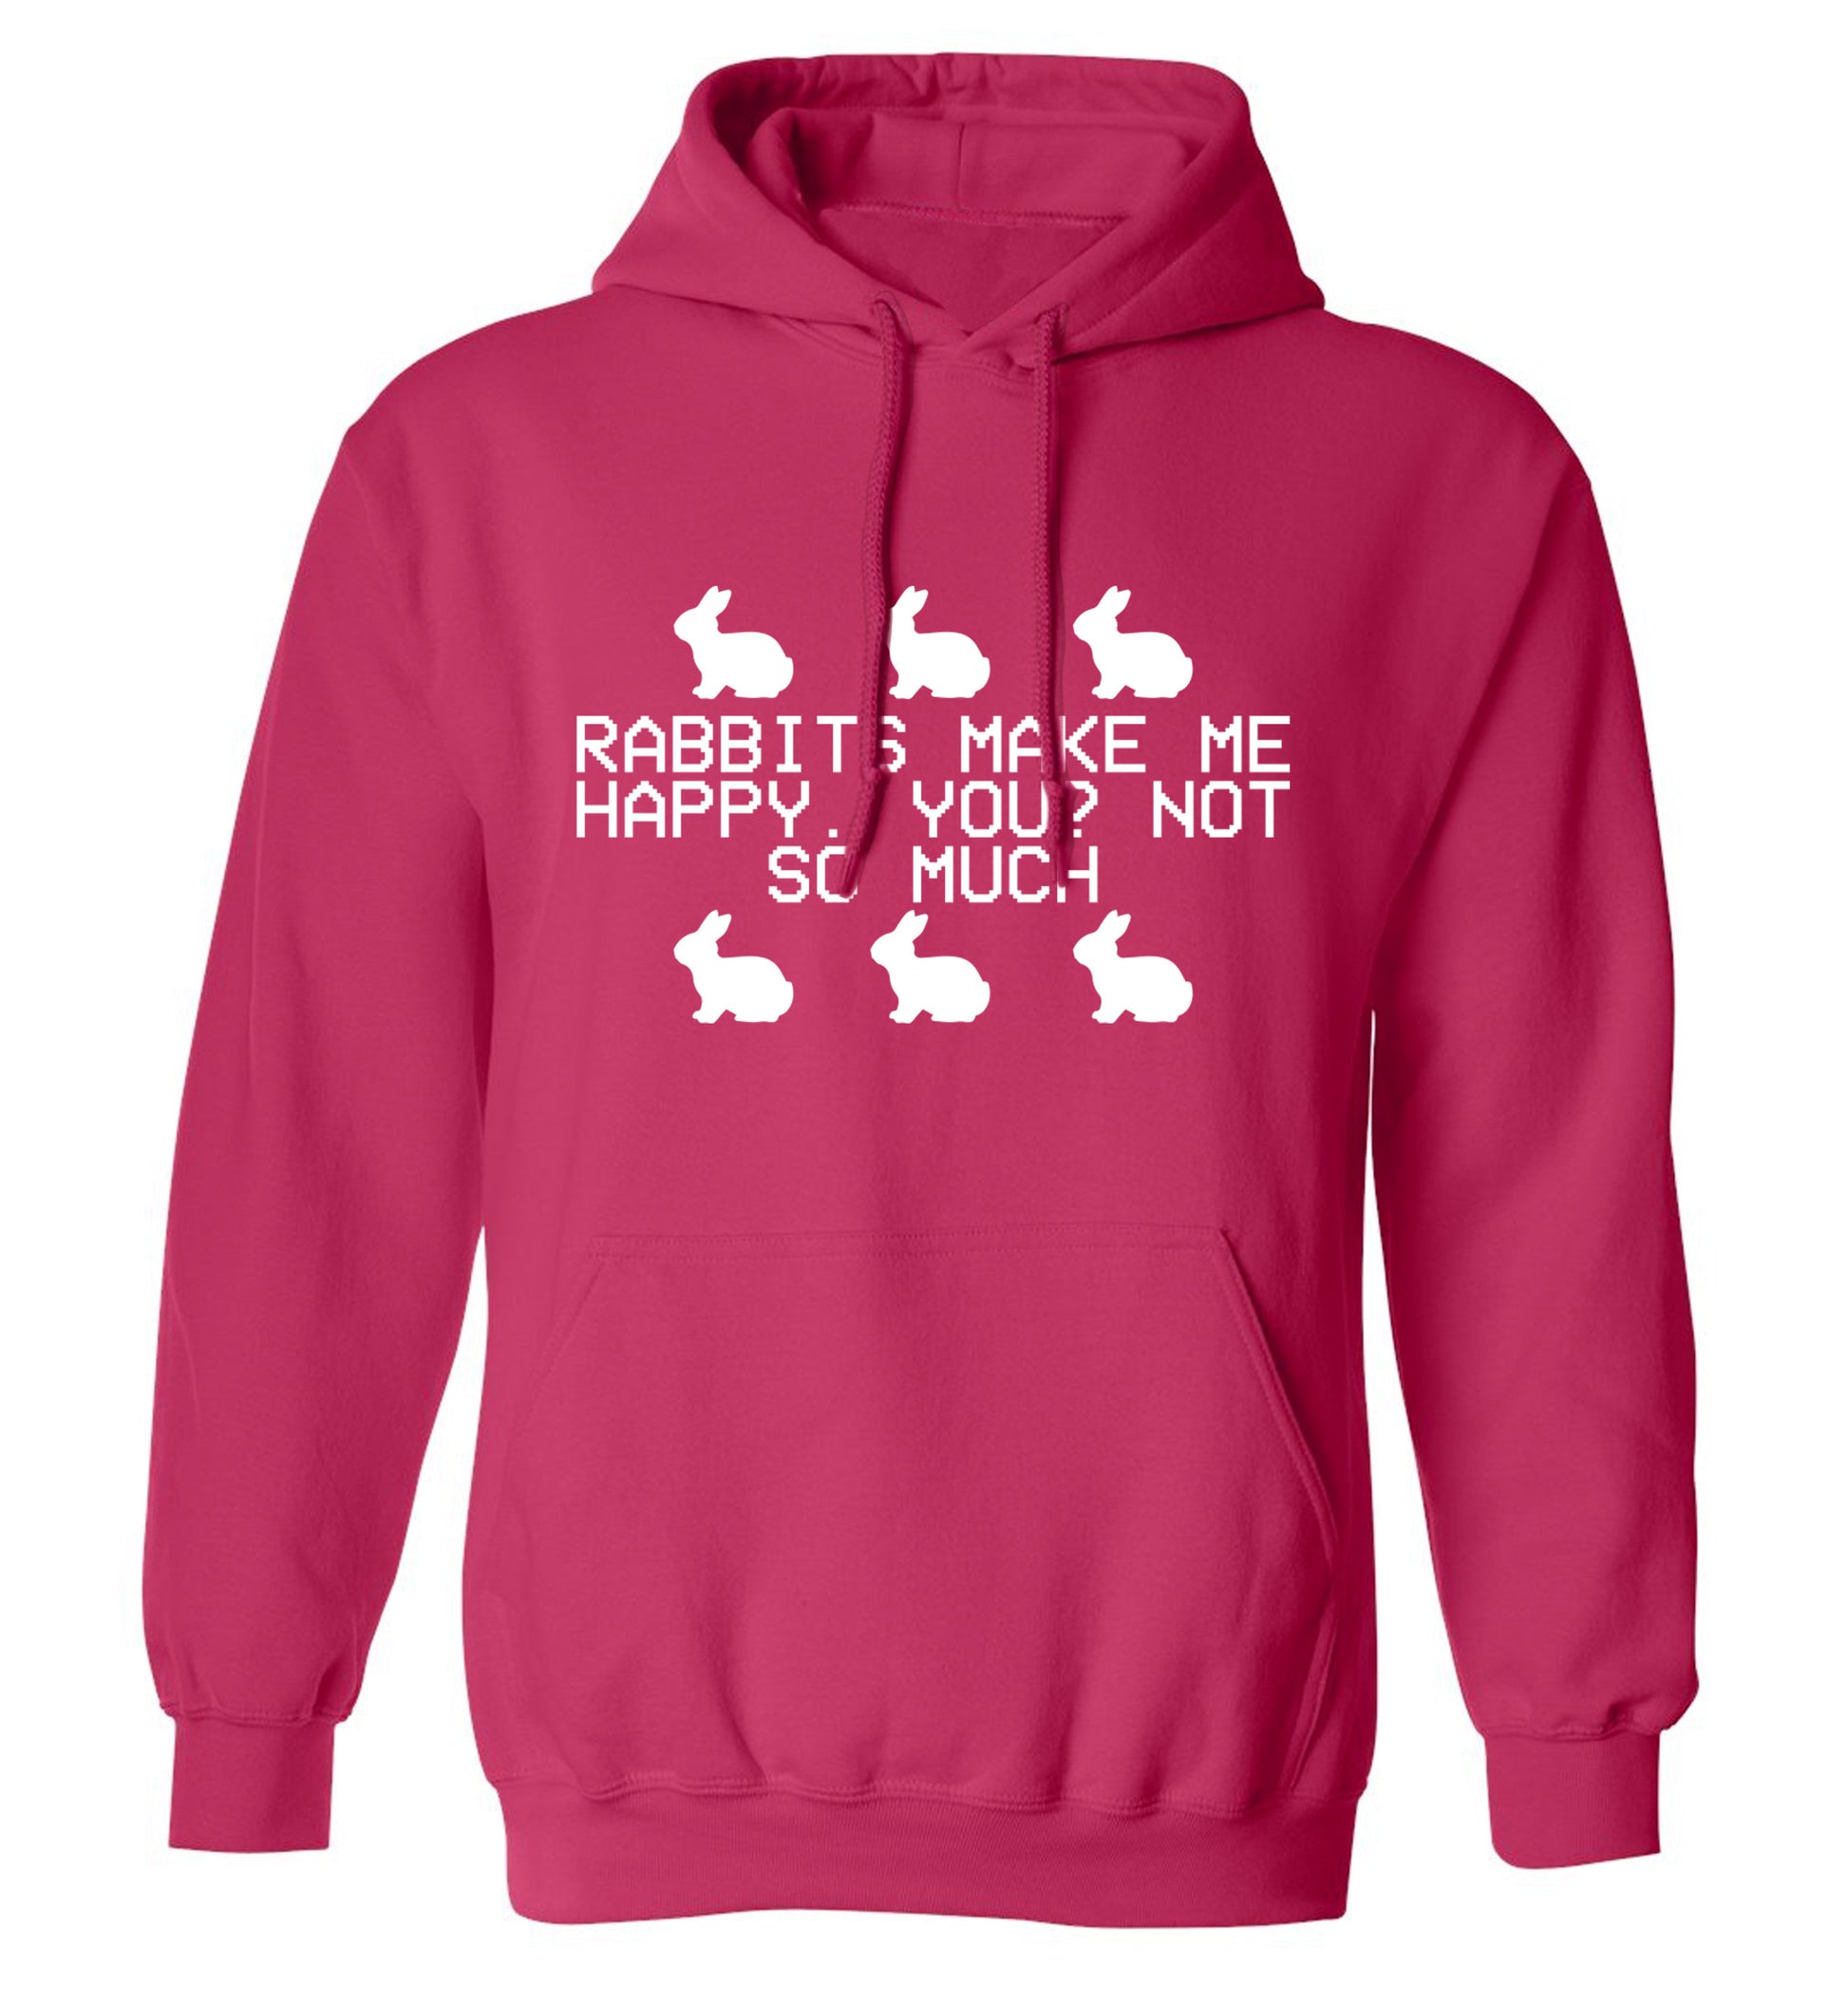 Rabbits make me happy, you not so much adults unisex pink hoodie 2XL